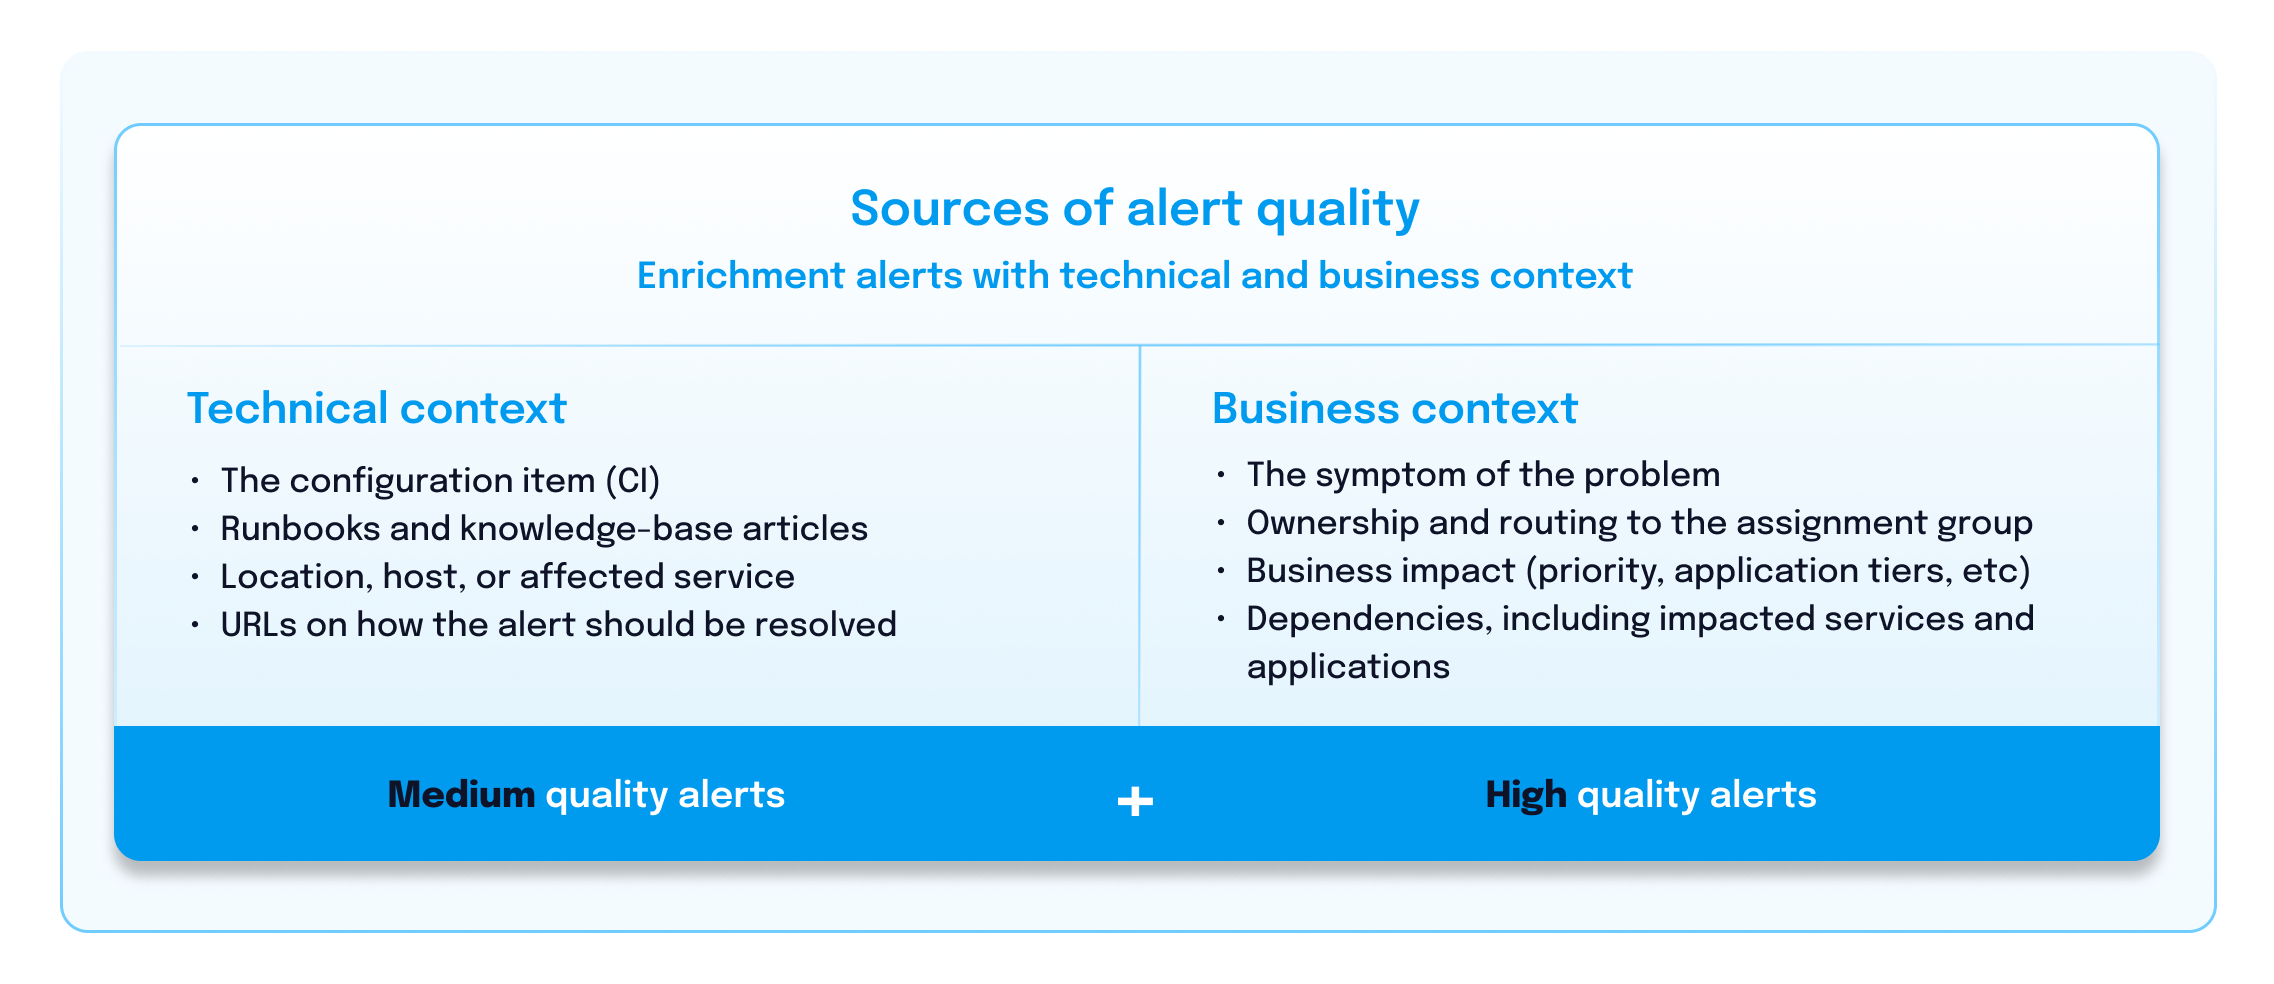 Sources of alert quality